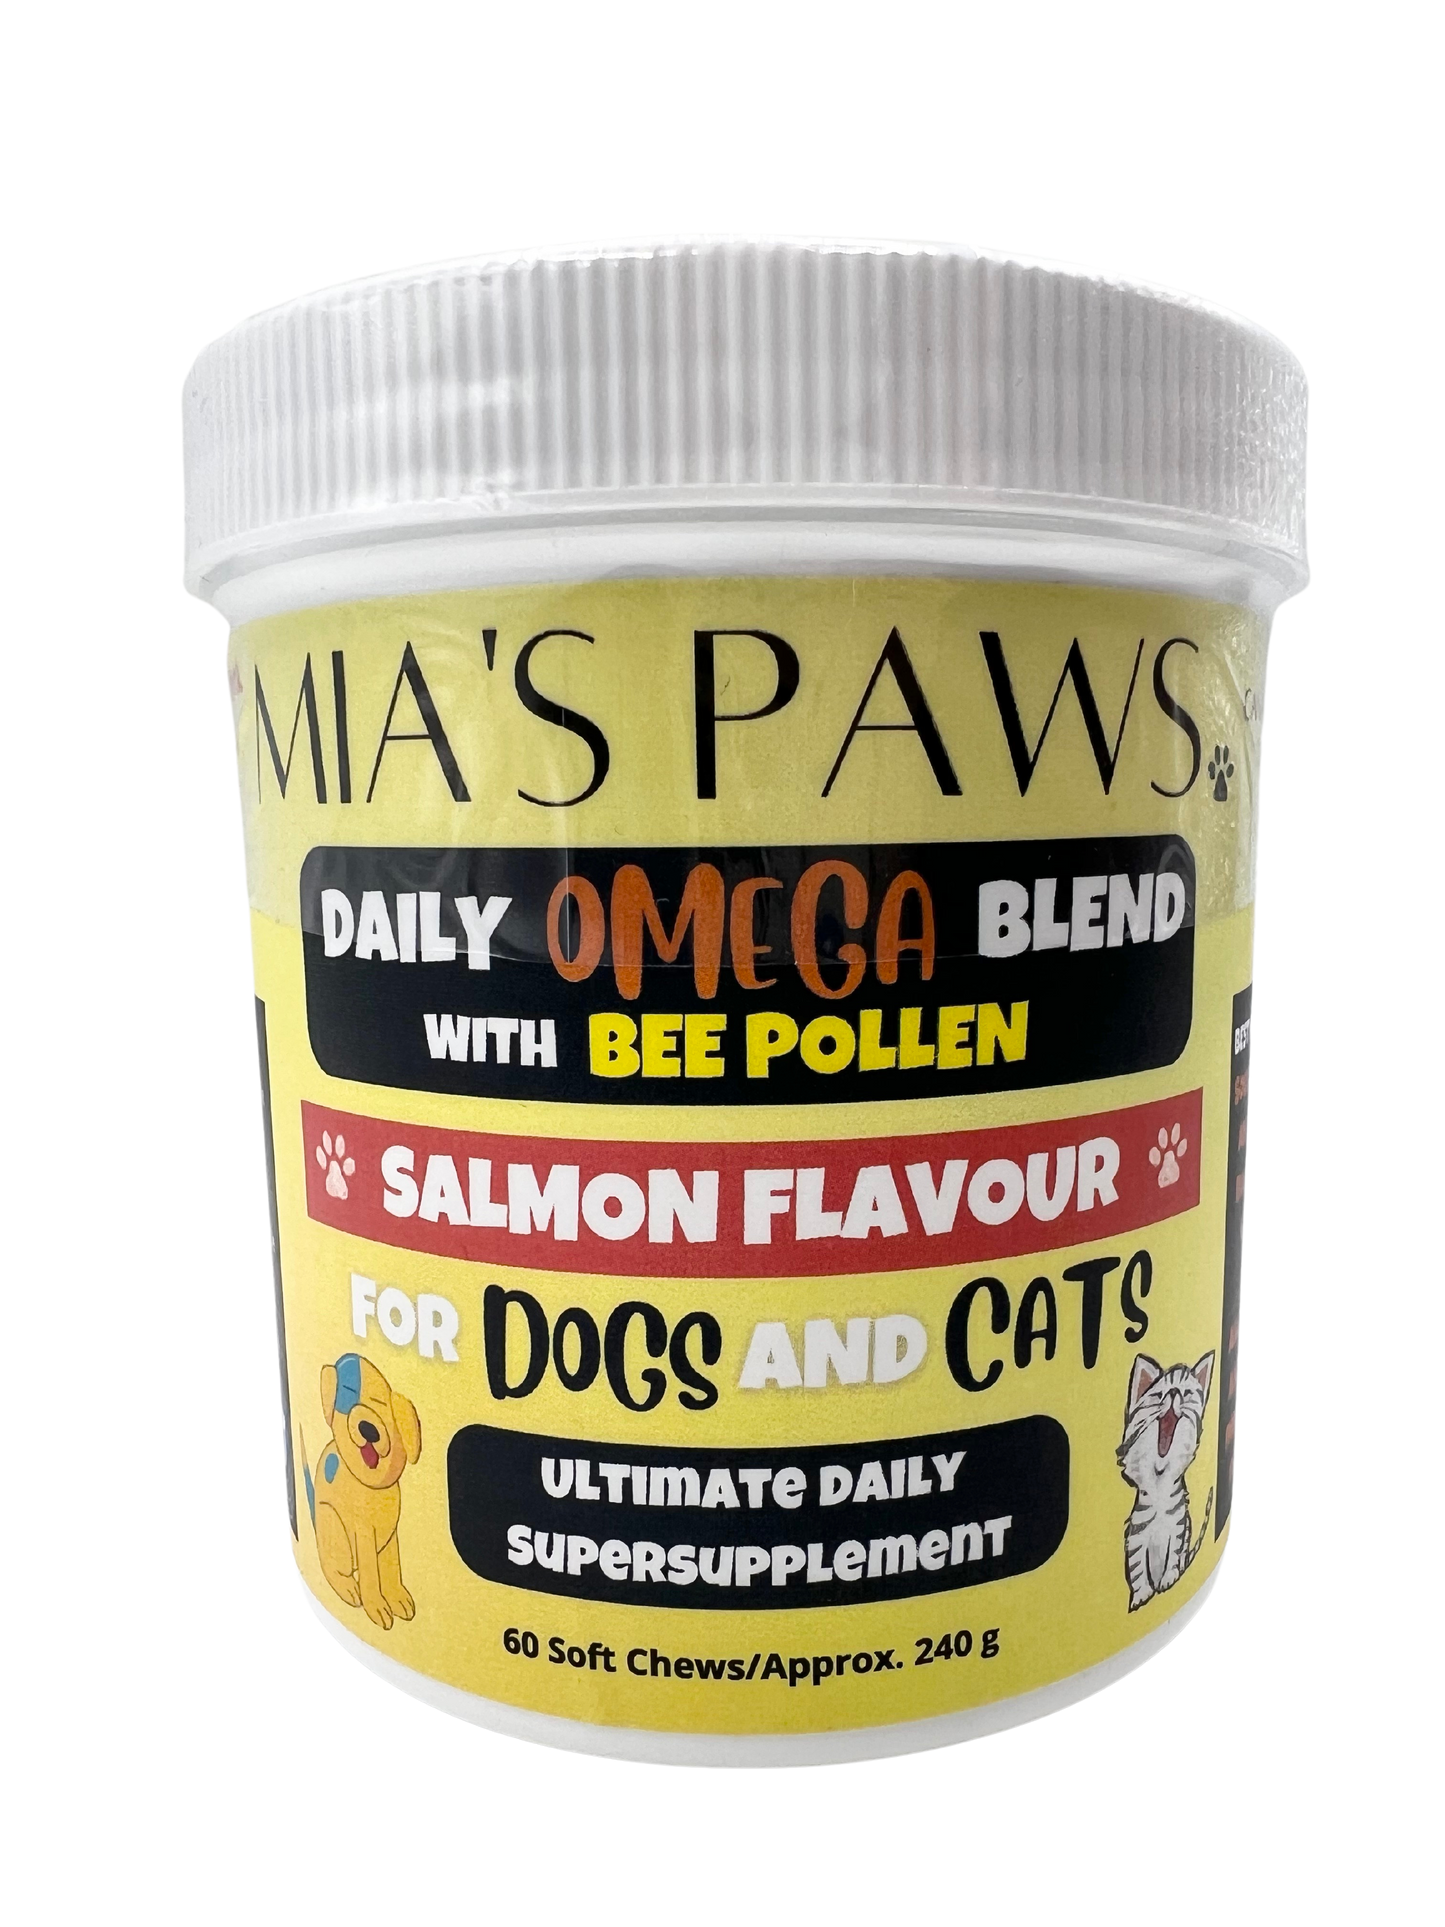 Mia's Paws Daily Omega Blend with Bee Pollen SOFT CHEWS - Mia's Paws